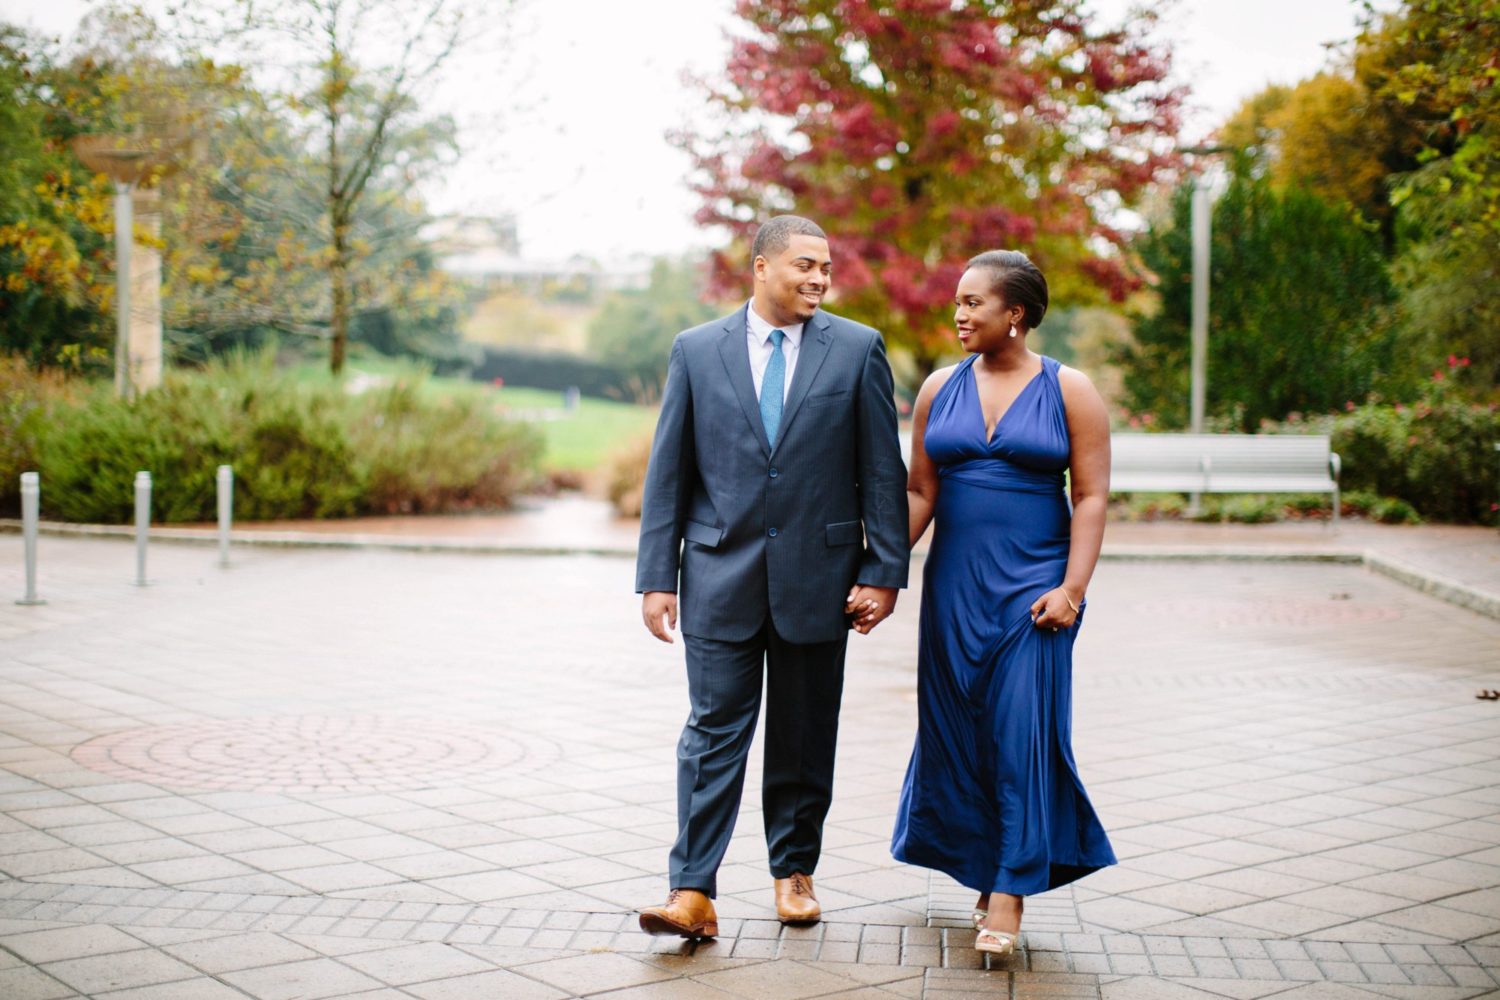 Engagement sessions at Cator Woolford garden in Atlanta Georgia.